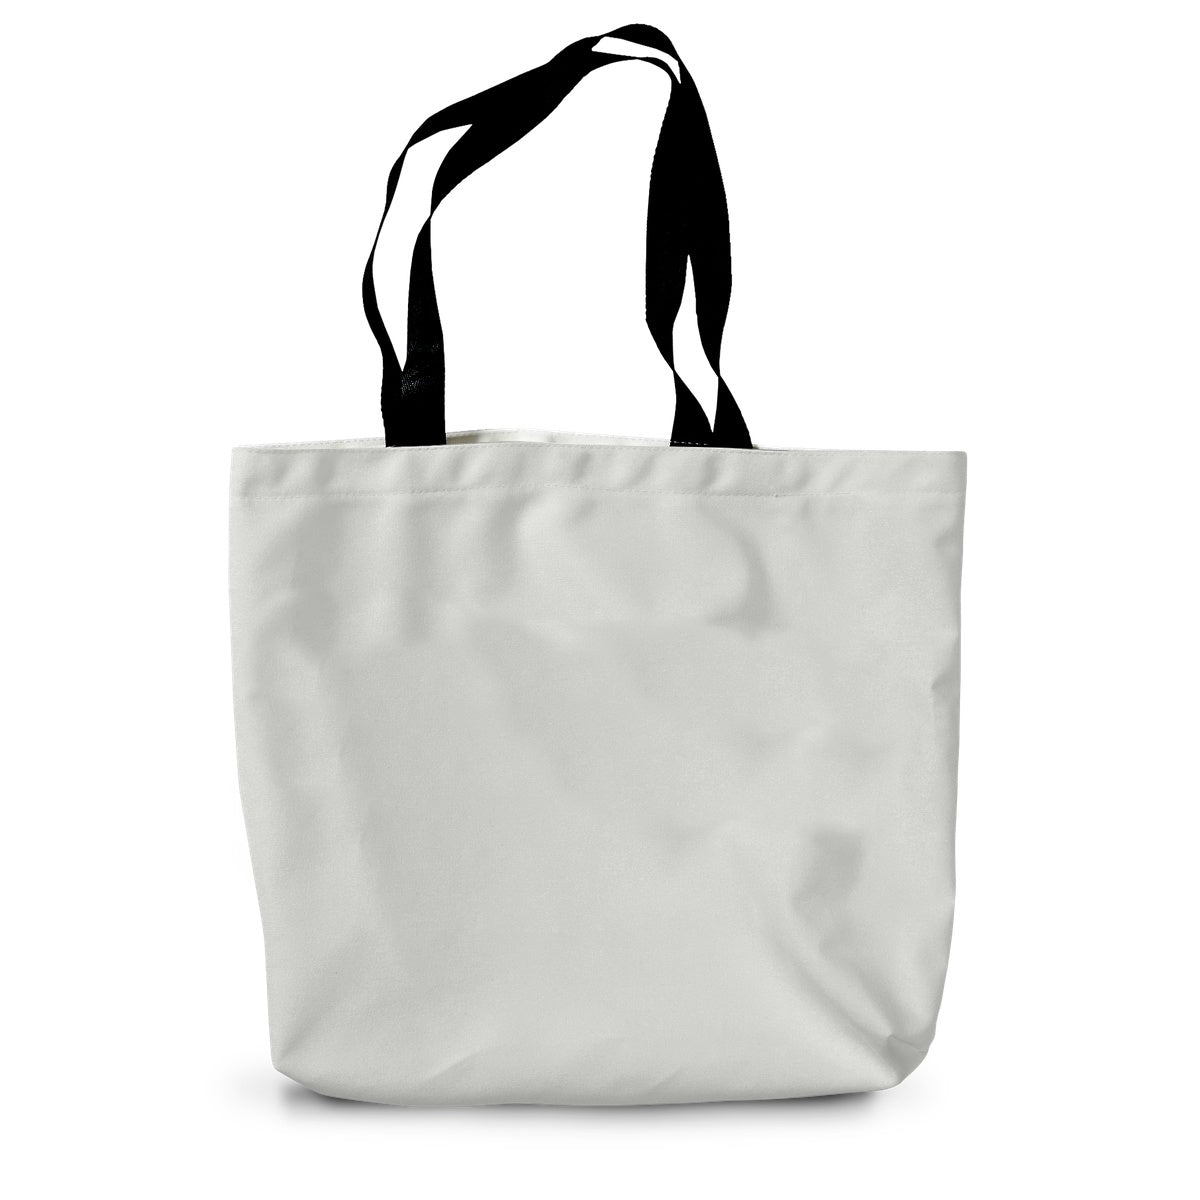 Pencil Point Largs Art Gifts Canvas Tote Bag